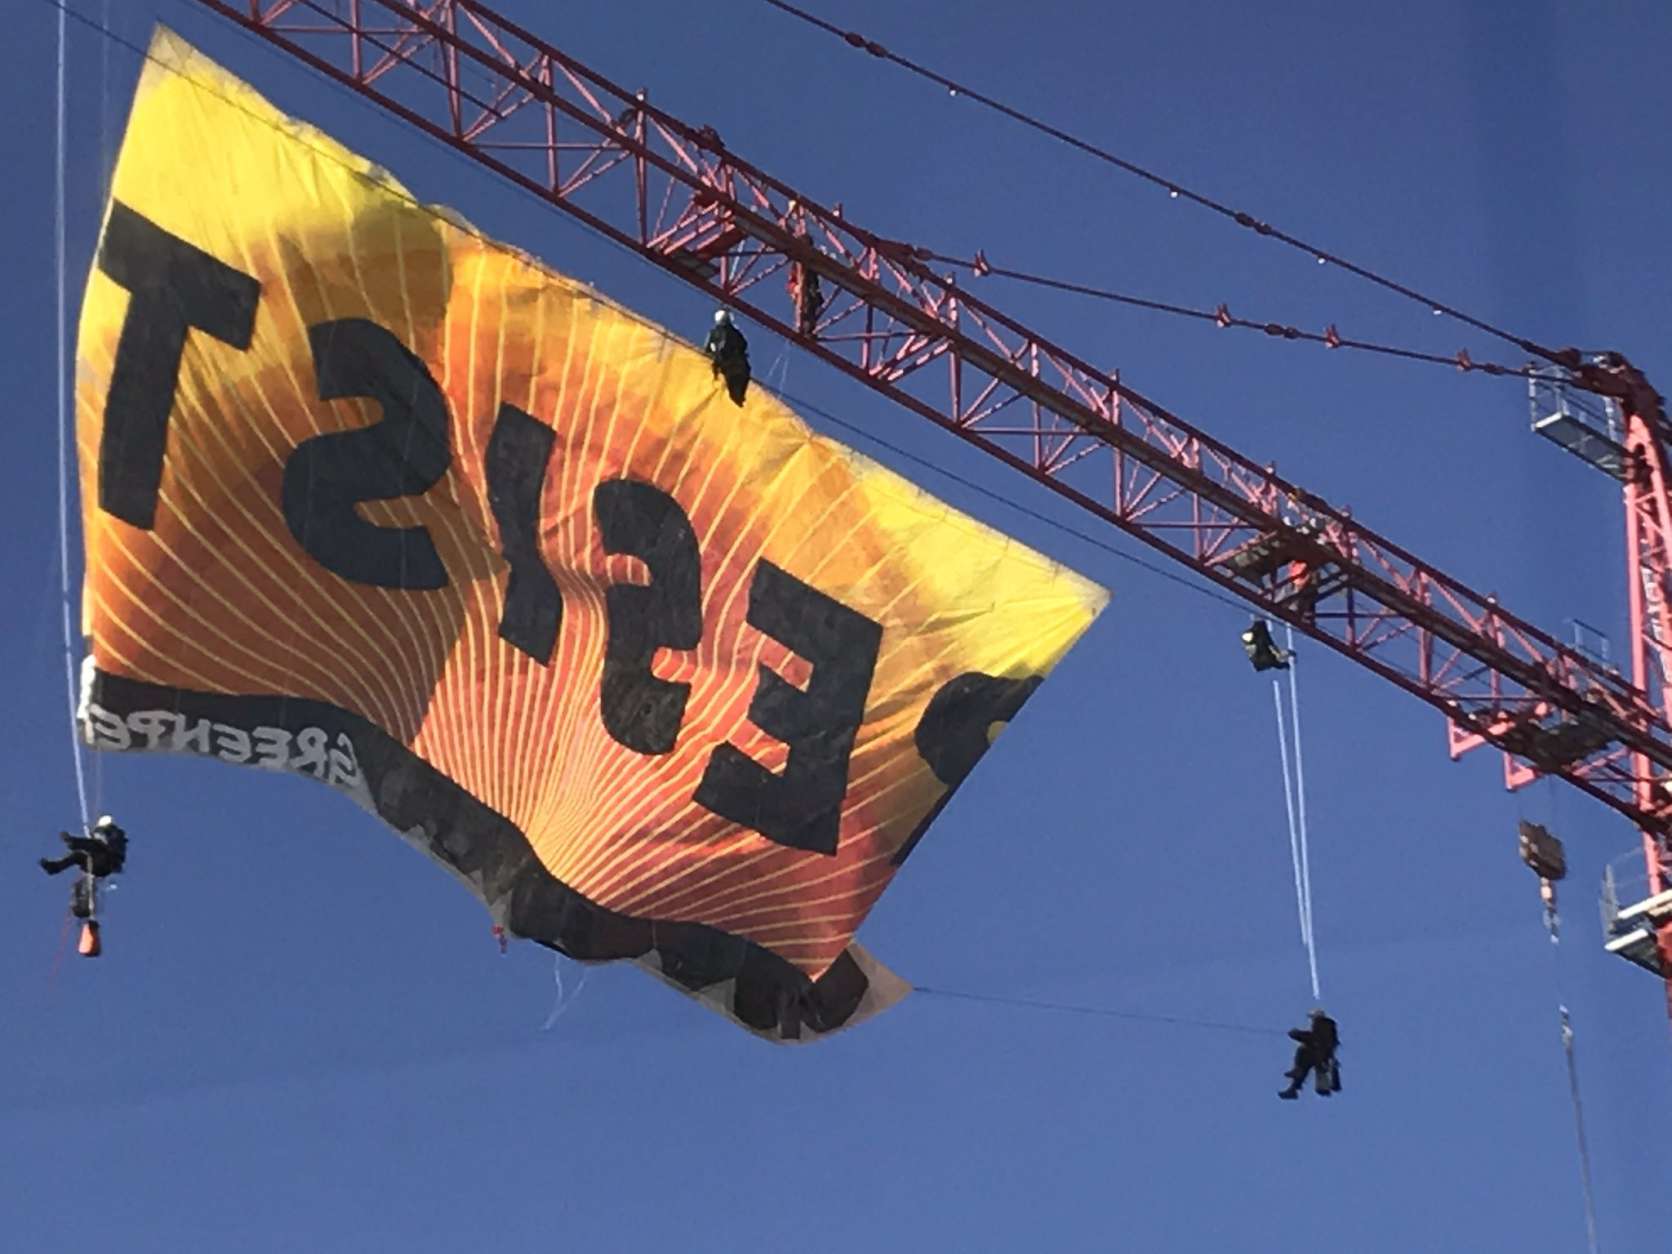 Protesters from Greenpeace unfurl a banner reading "Resist" from a construction crane in downtown D.C. Wednesday morning. (WTOP/Neal Augenstein)